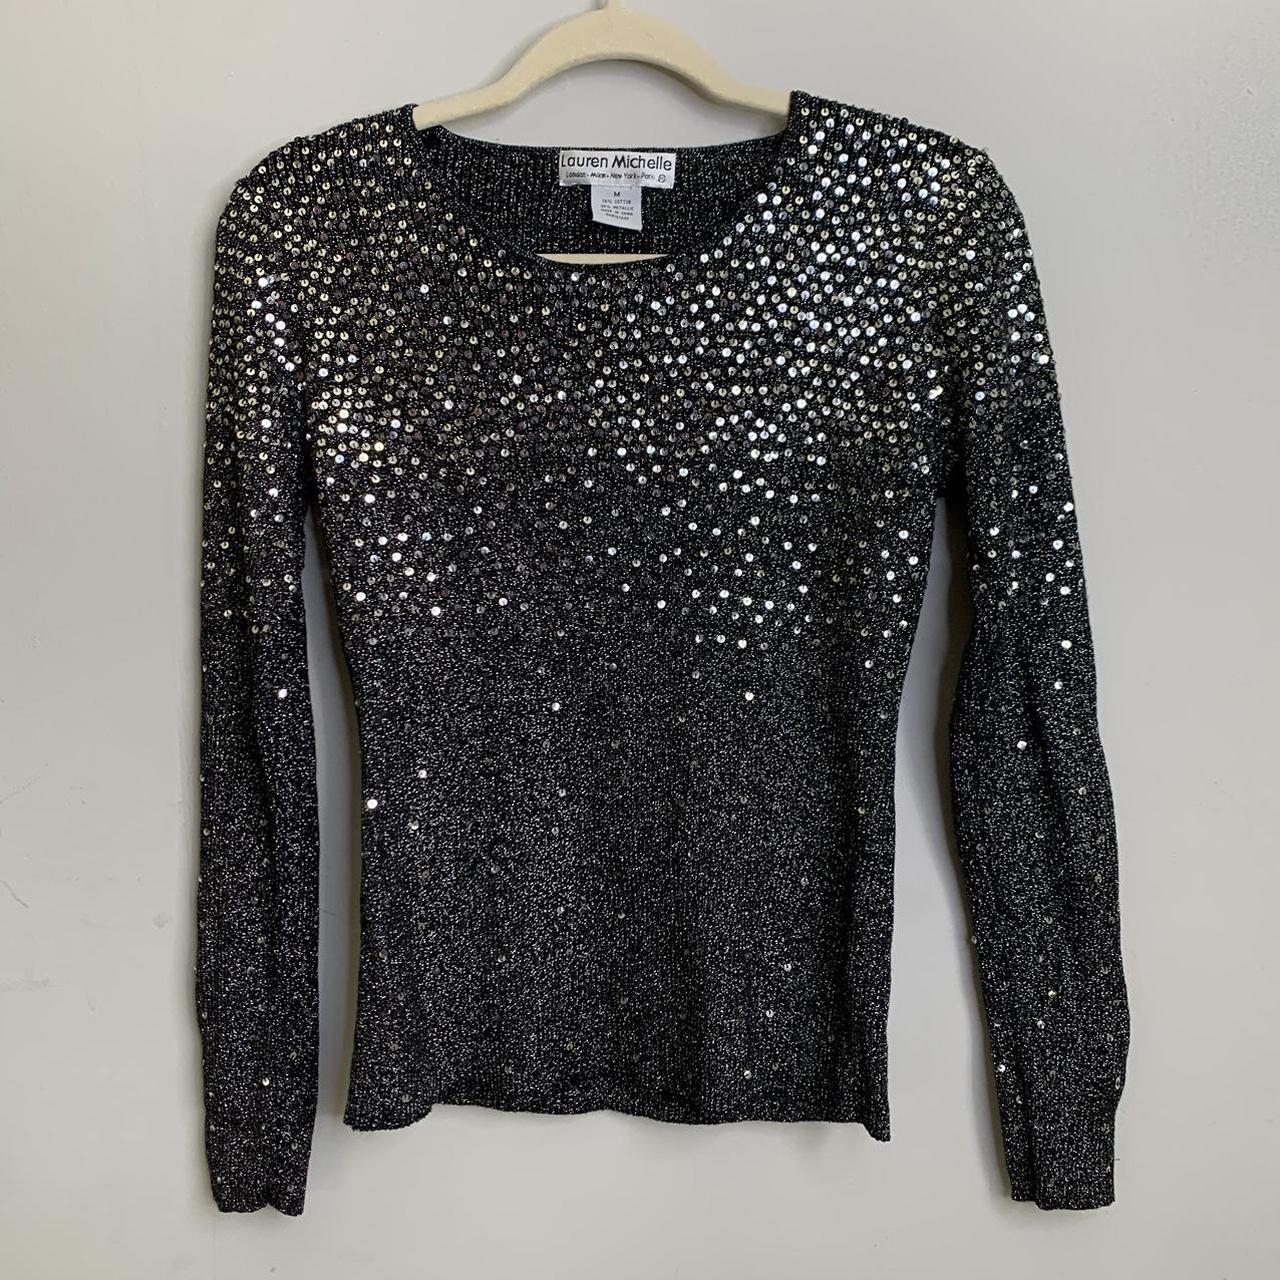 shimmer metallic top perfect for new years vibes,... - Depop